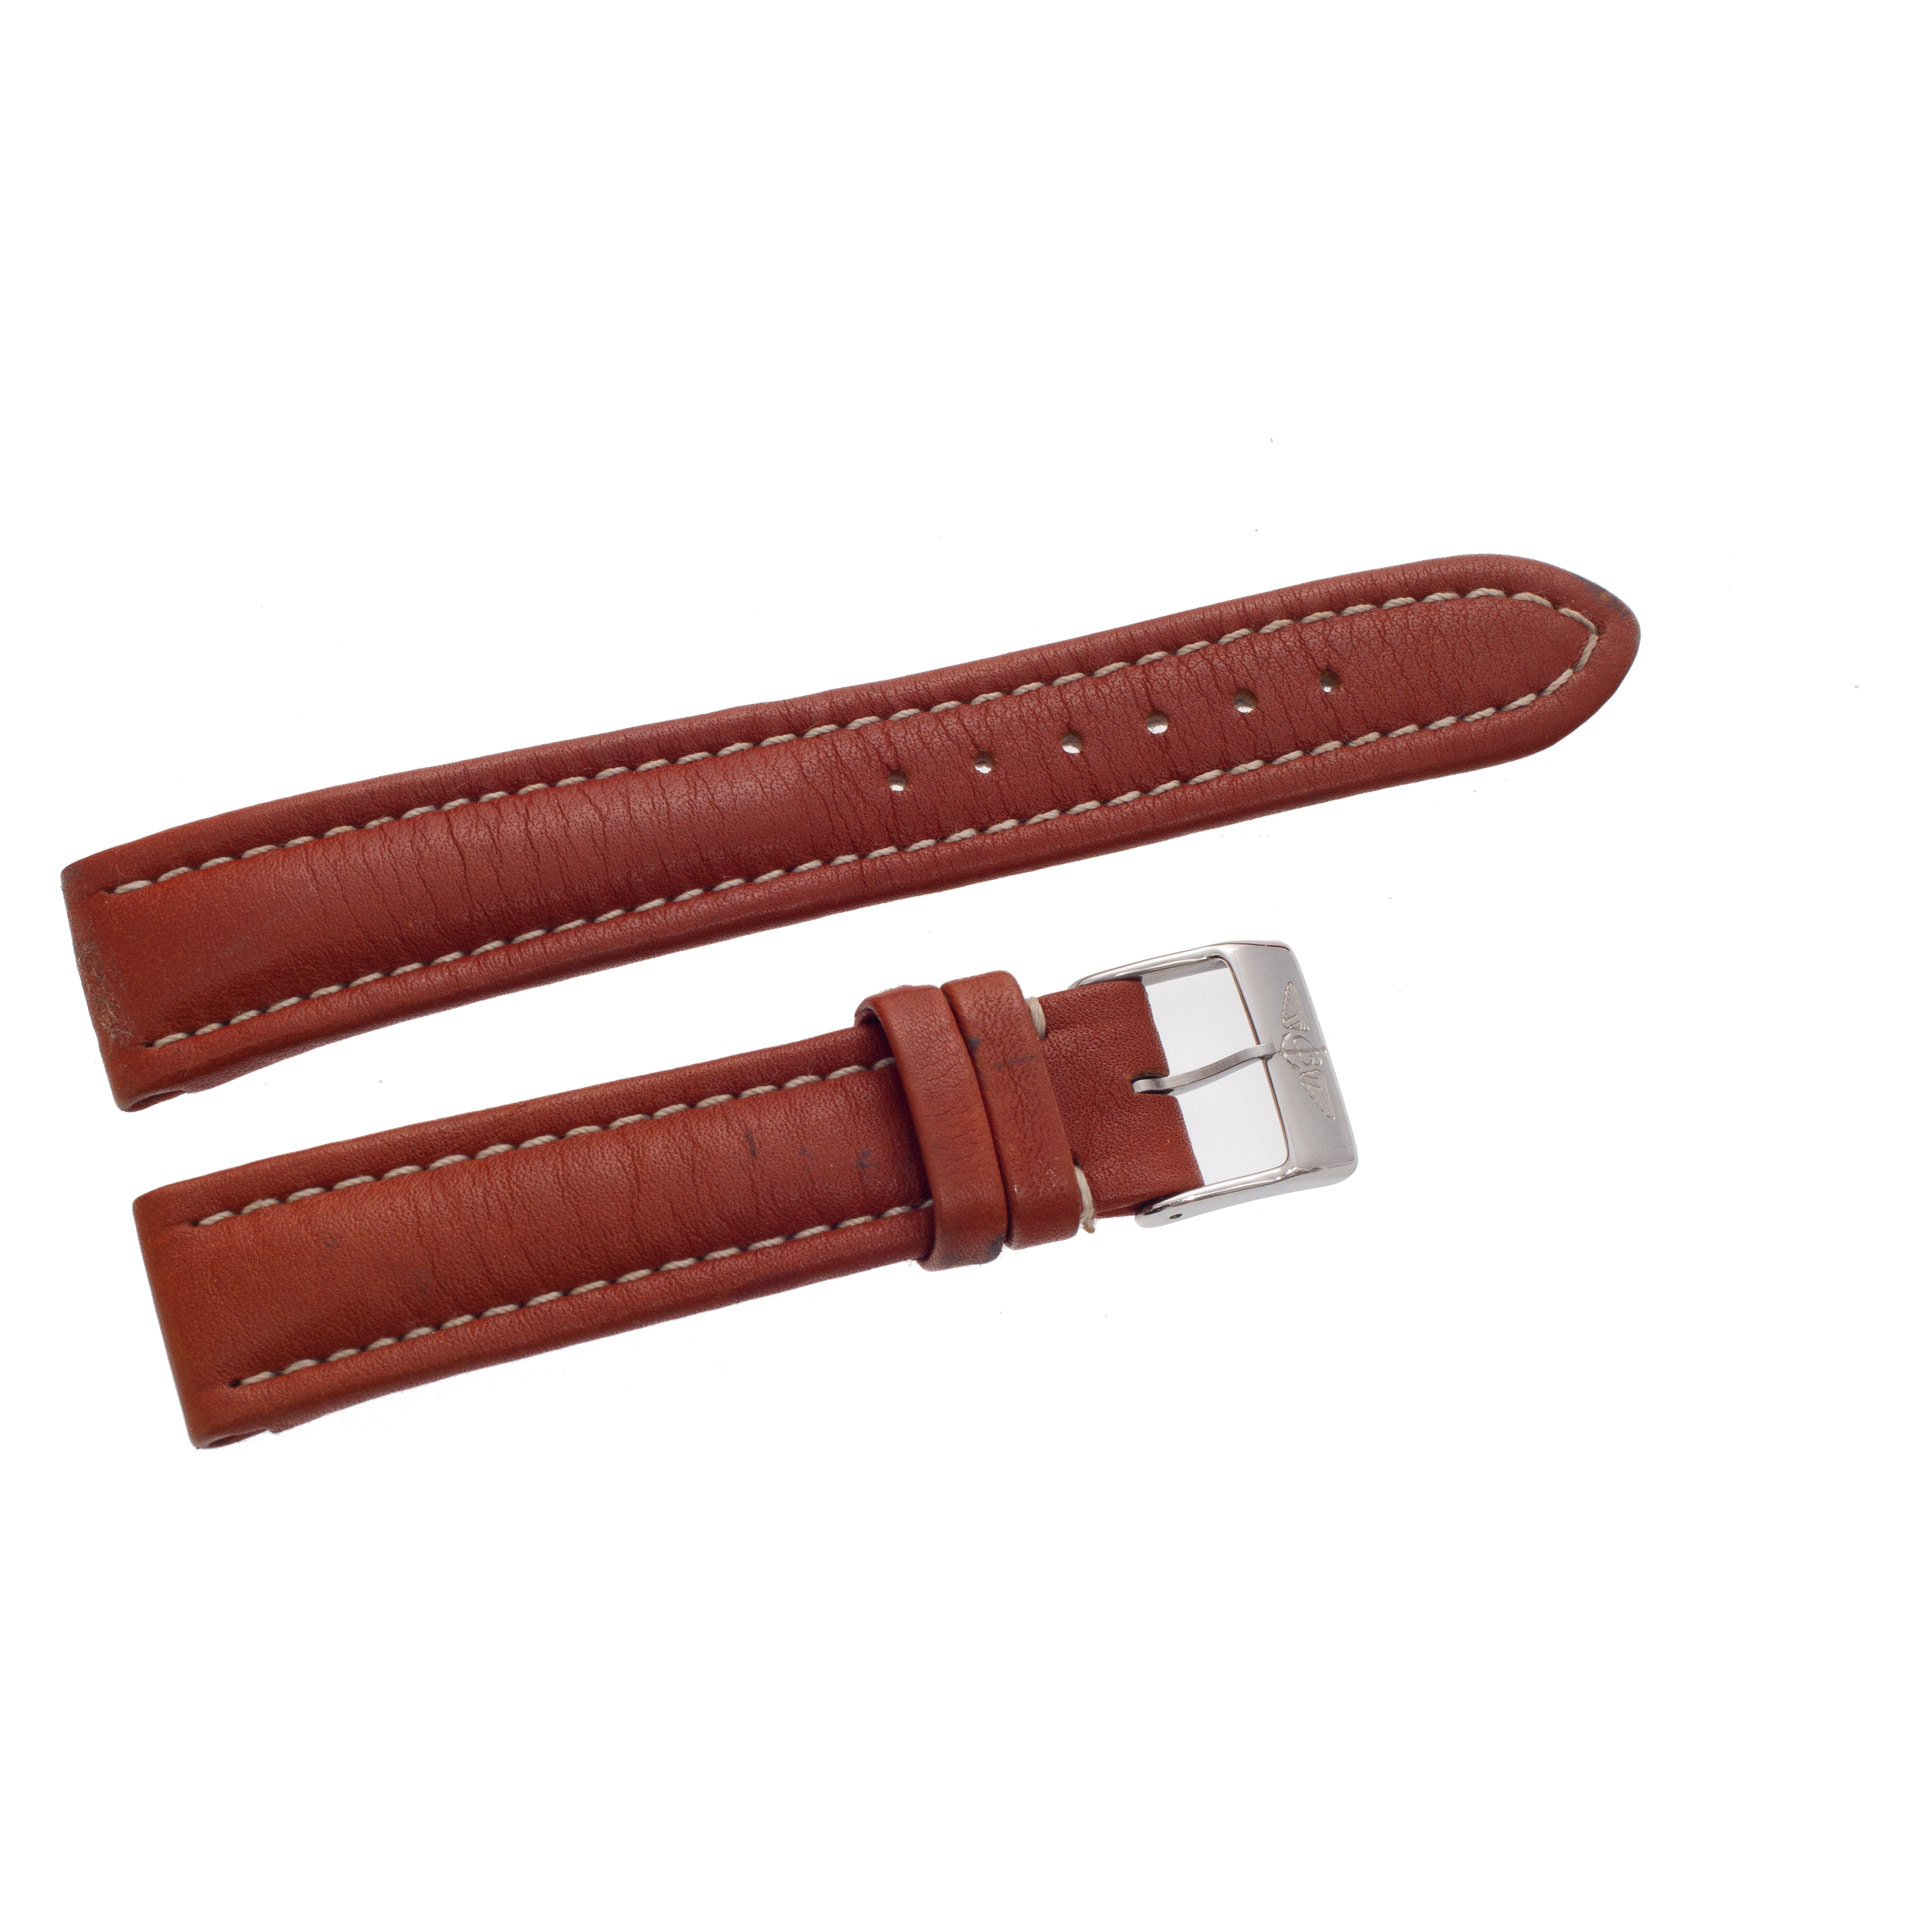 Breitling brown leather strap with original st/s buckle at 18mm x 16mm